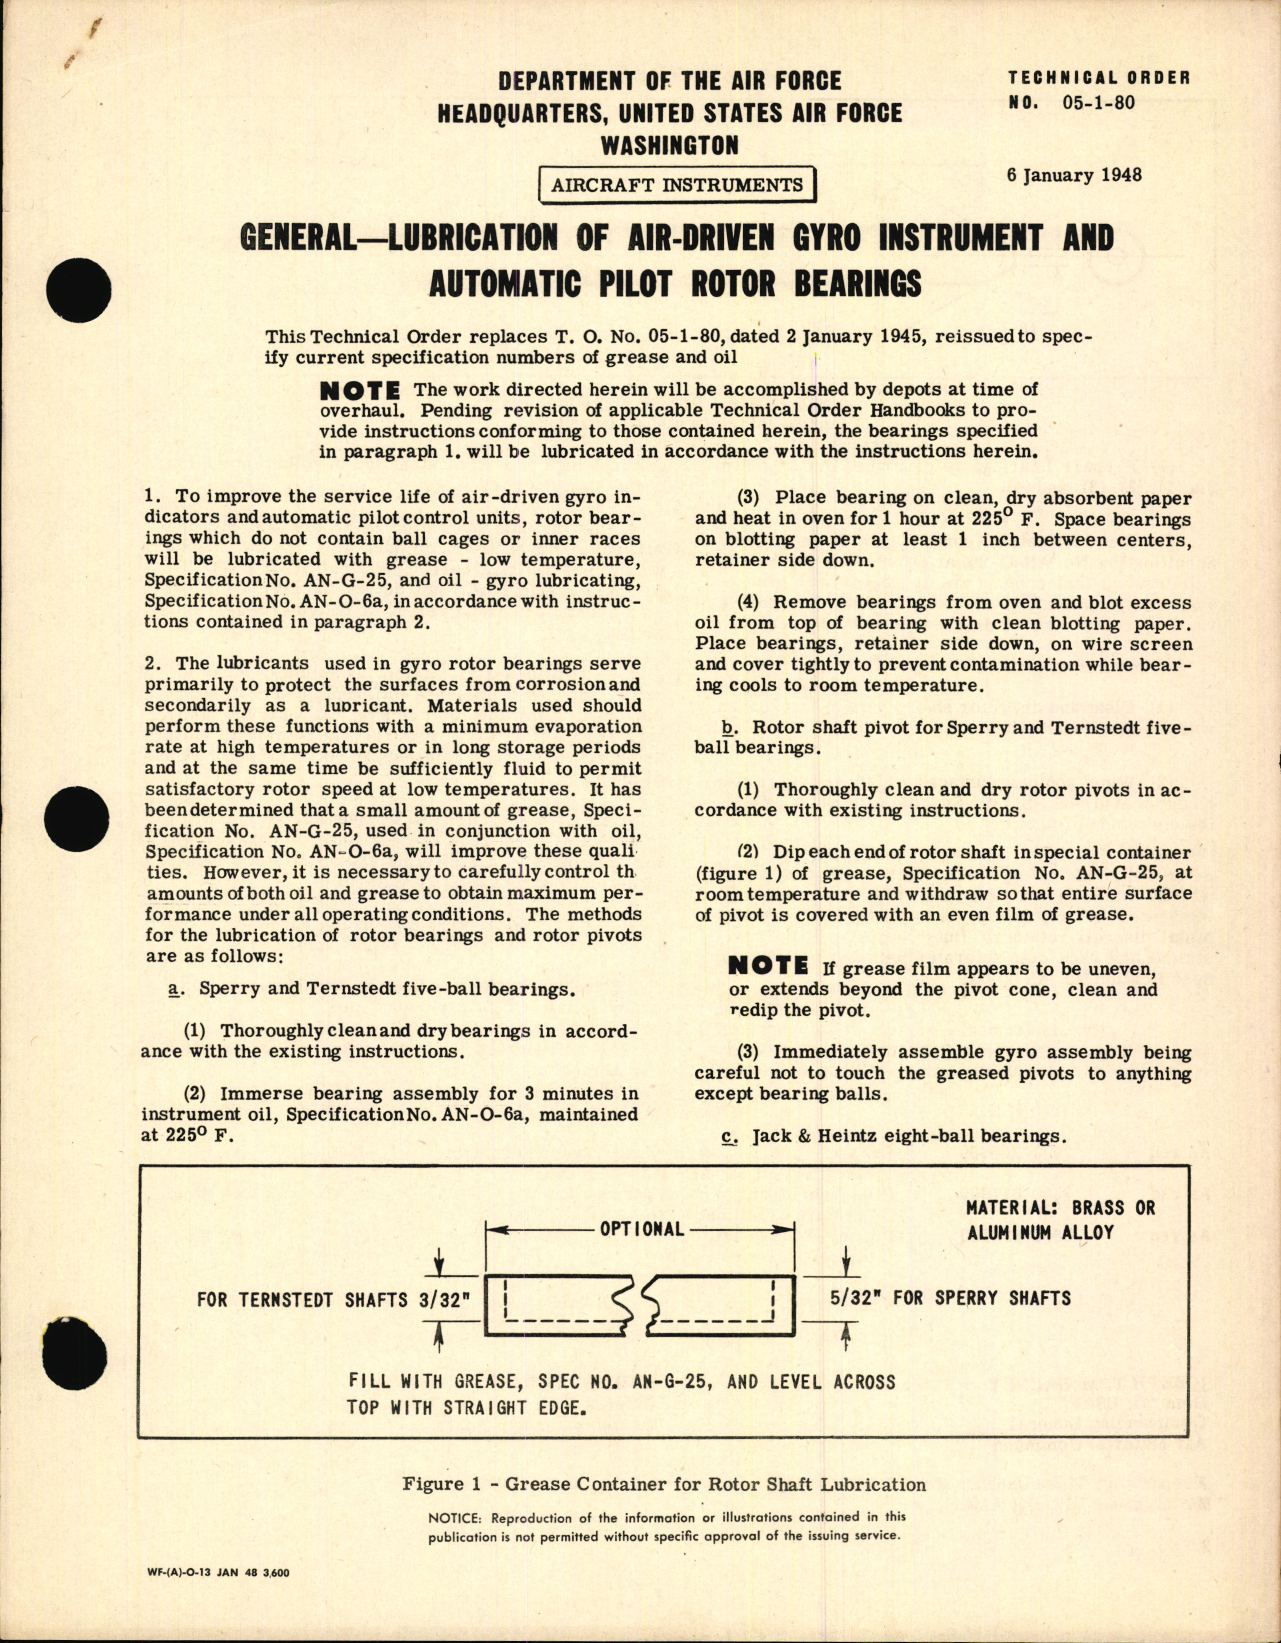 Sample page 1 from AirCorps Library document: Lubrication of Air-Driven Gyro Instrument and Automatic Pilot Rotor Bearings